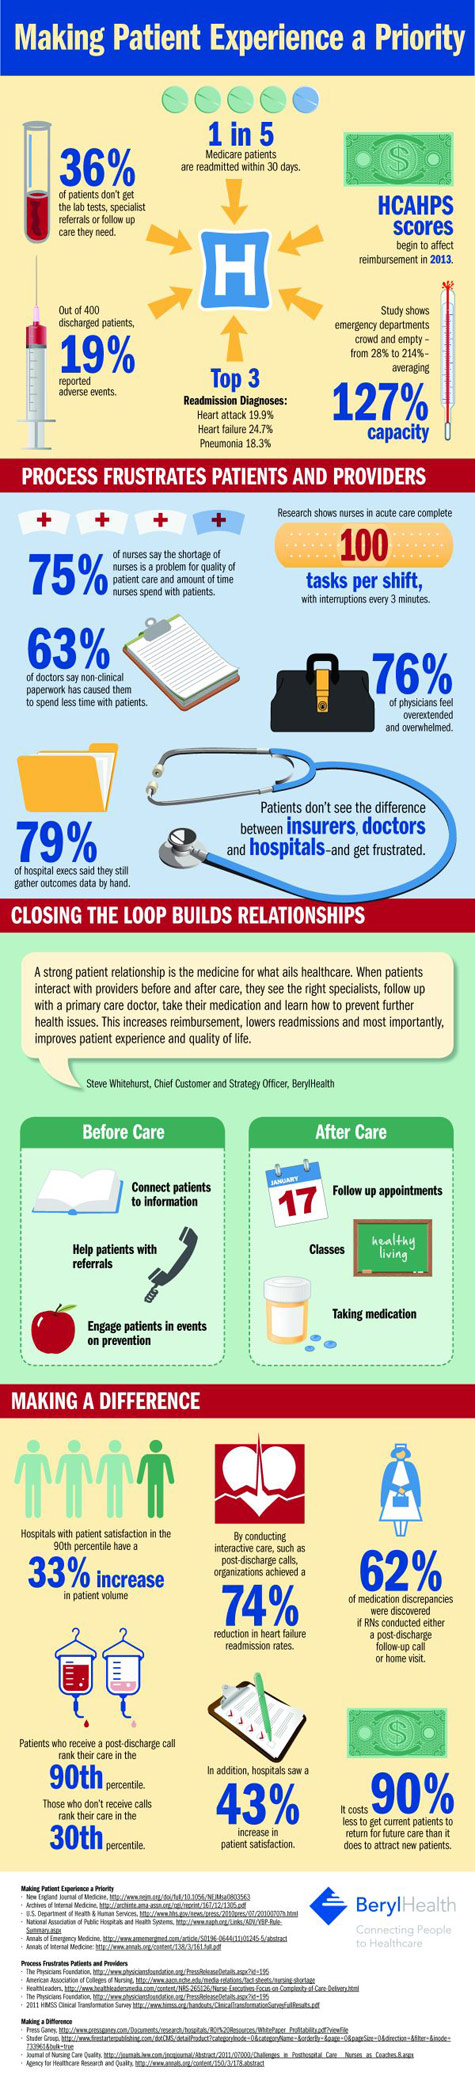 making patient experience a priority infographic